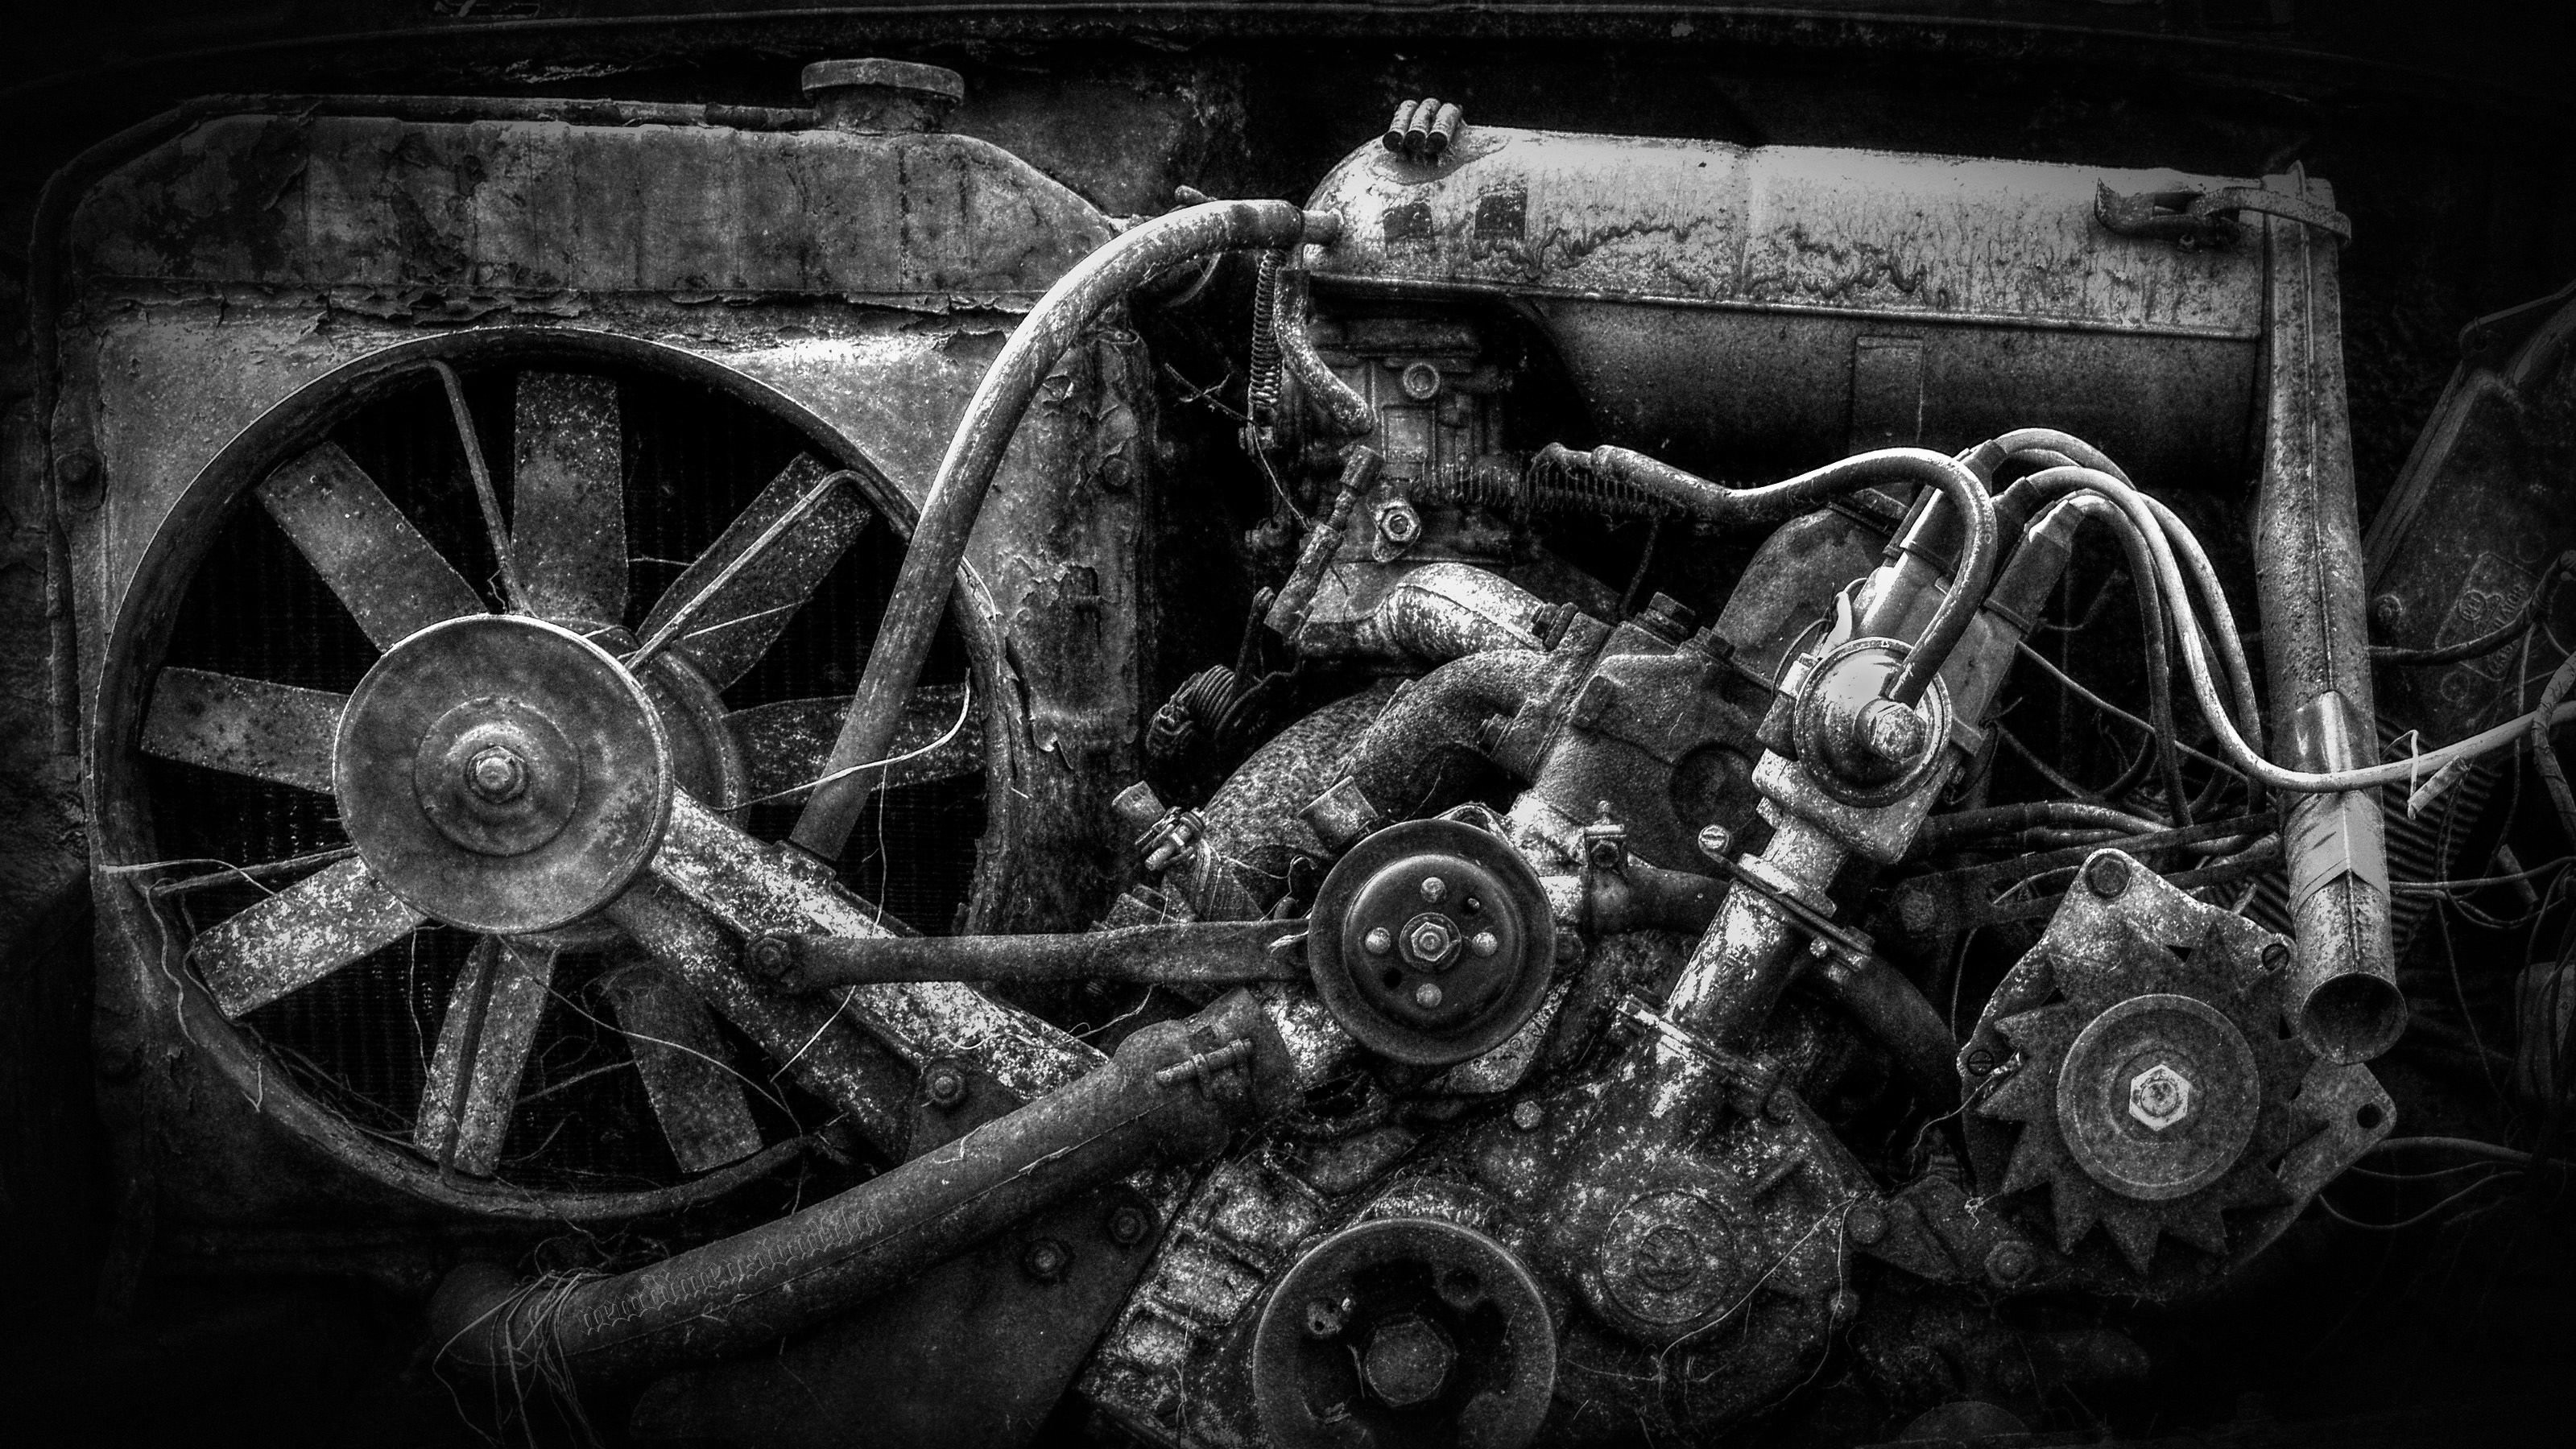 Black Background Engines Gears Technology Wheels Pipes Fans Metal Monochrome Rust Vehicle Wreck Hist 3199x1800